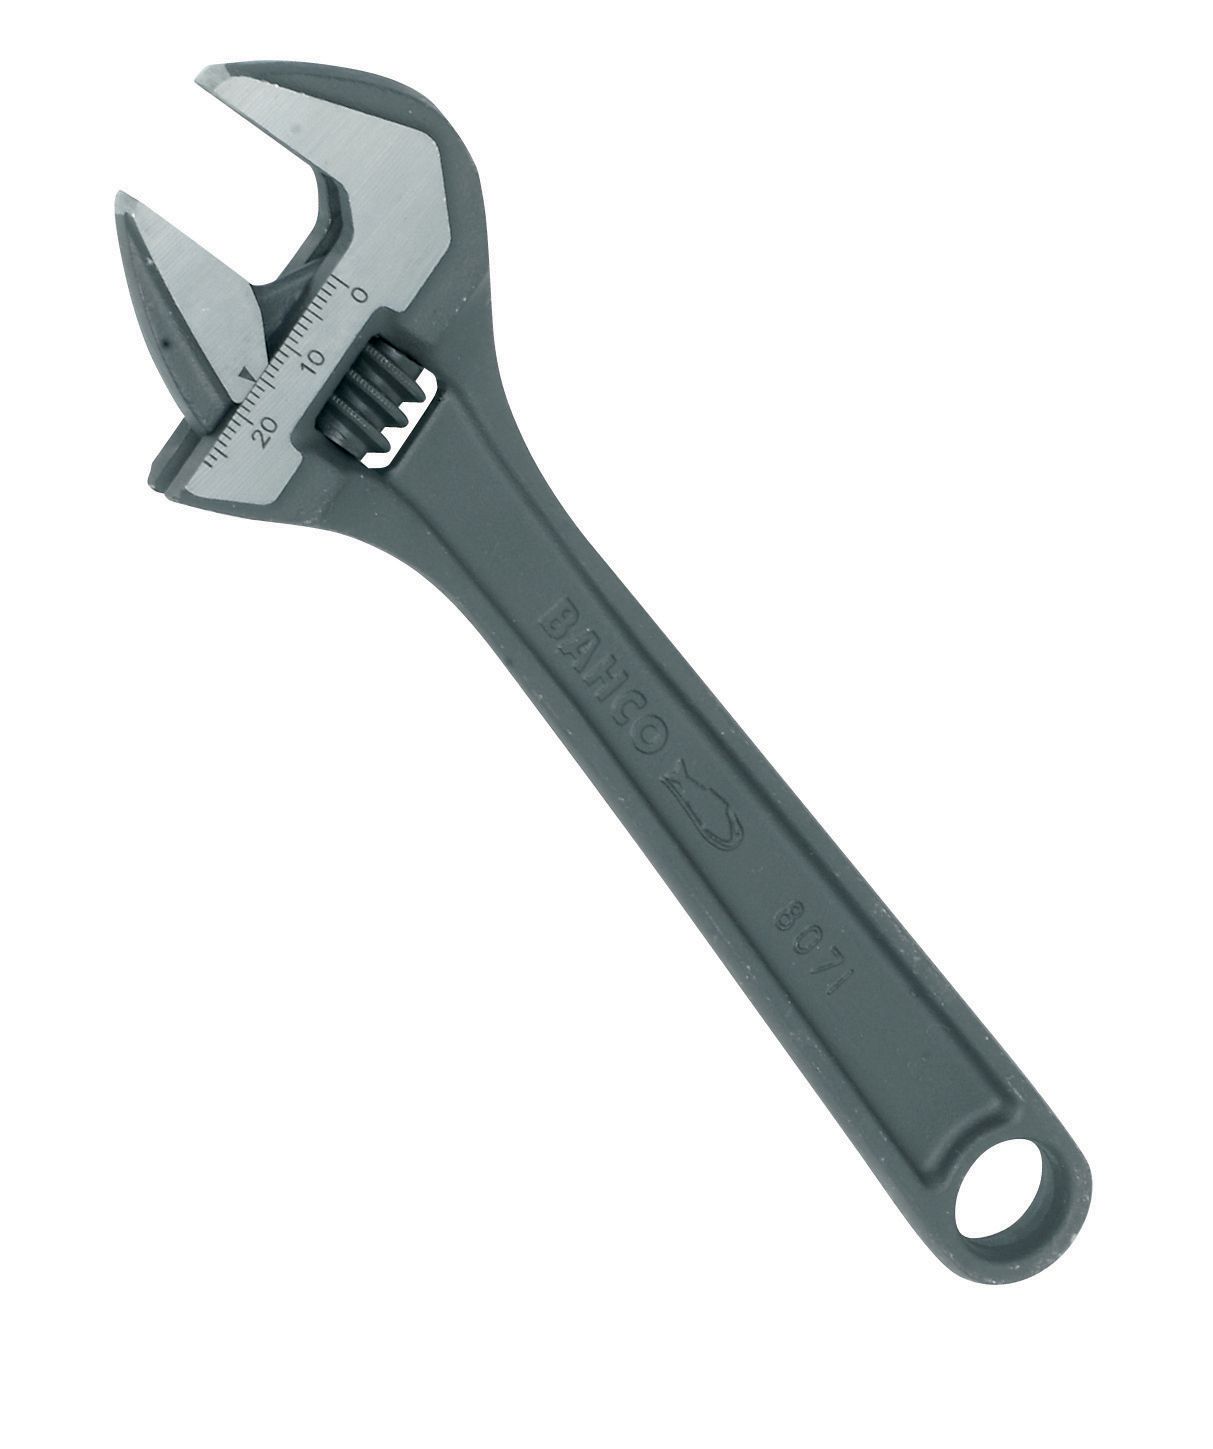 Bahco 27mm Adjustable wrench